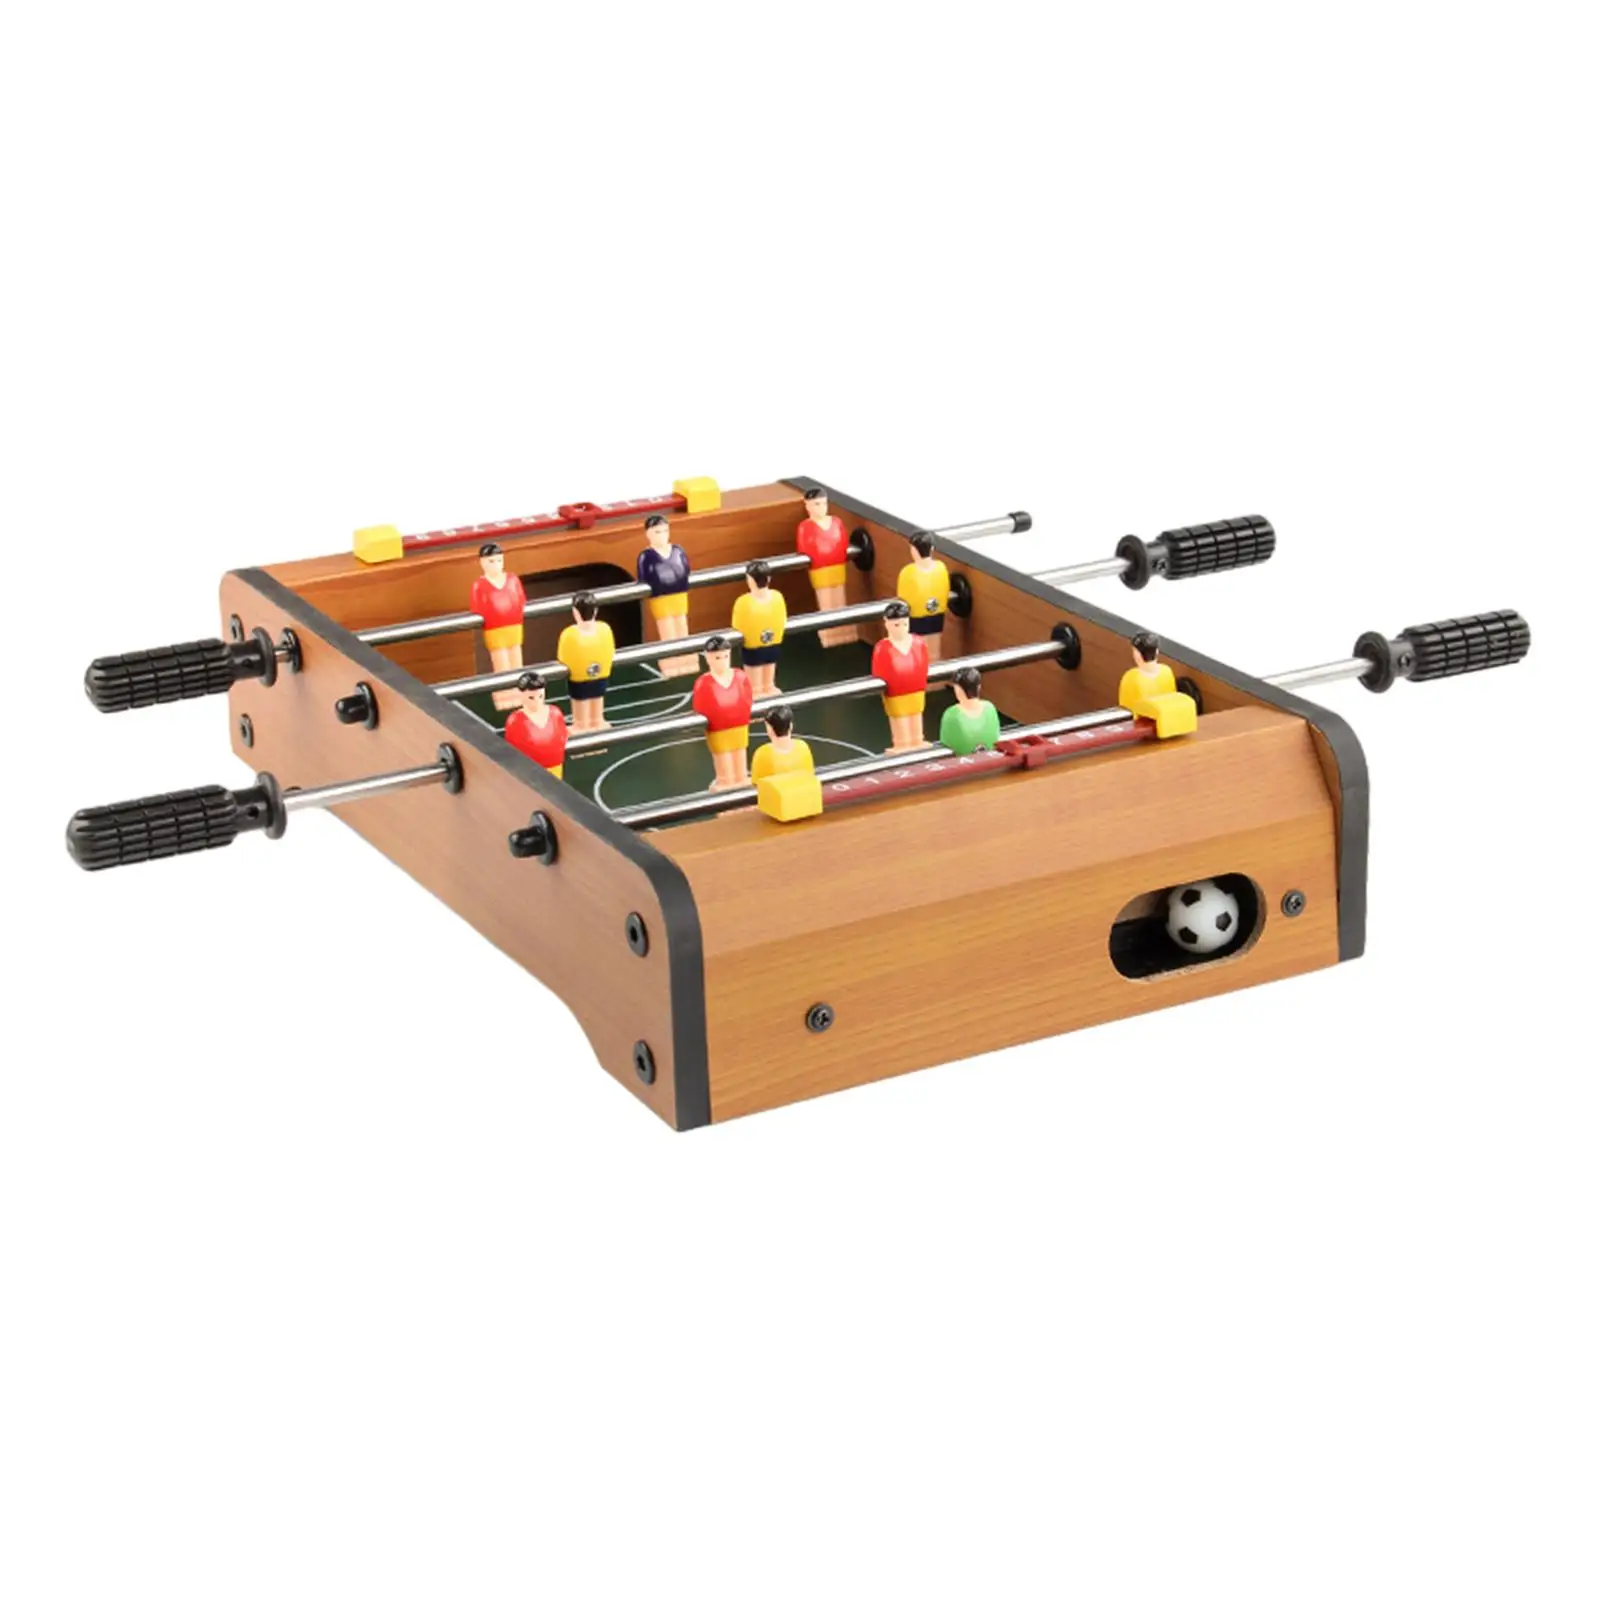 Portable Table Top Football Table Football for Adults Family Game Indoor